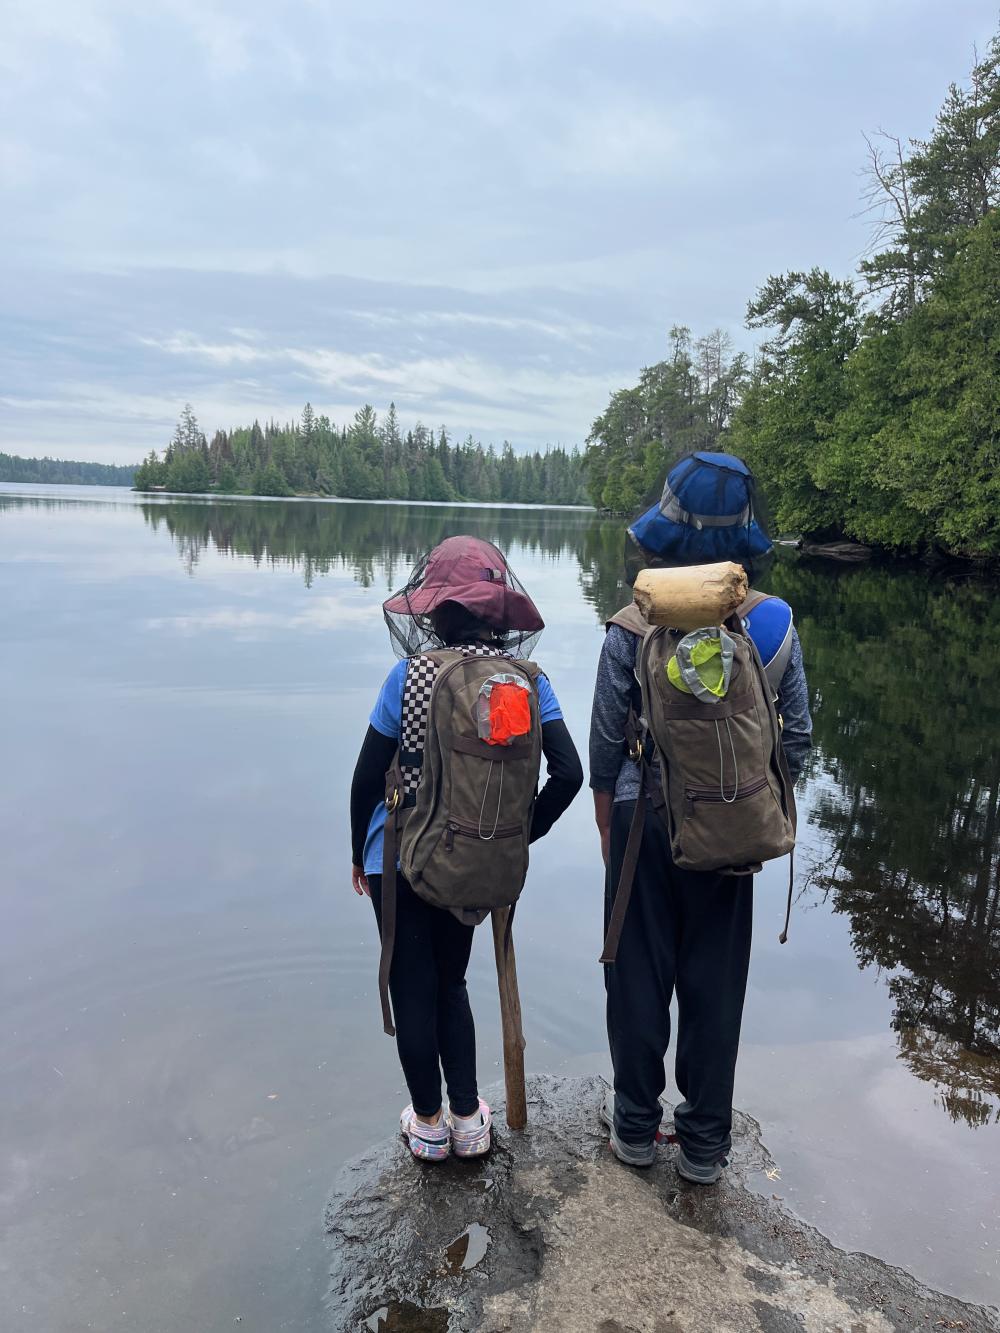 Kids standing near water with backpacks